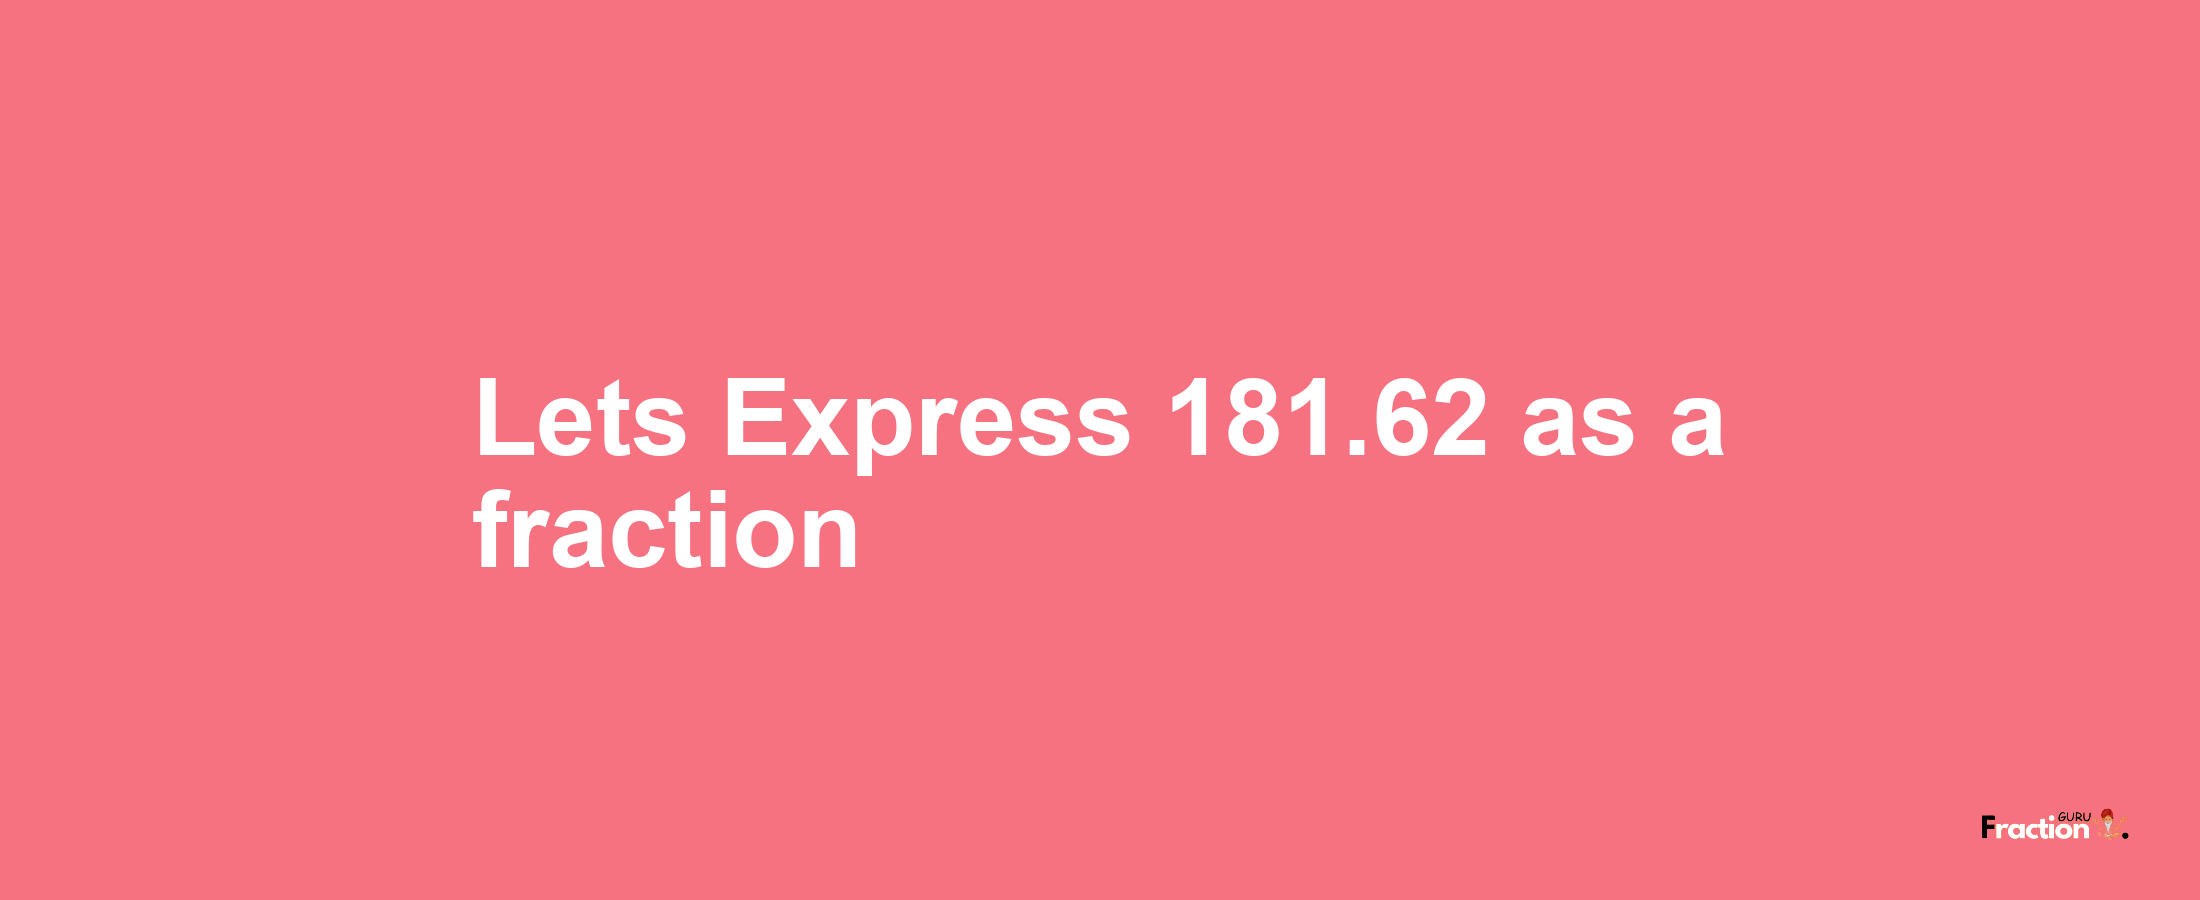 Lets Express 181.62 as afraction